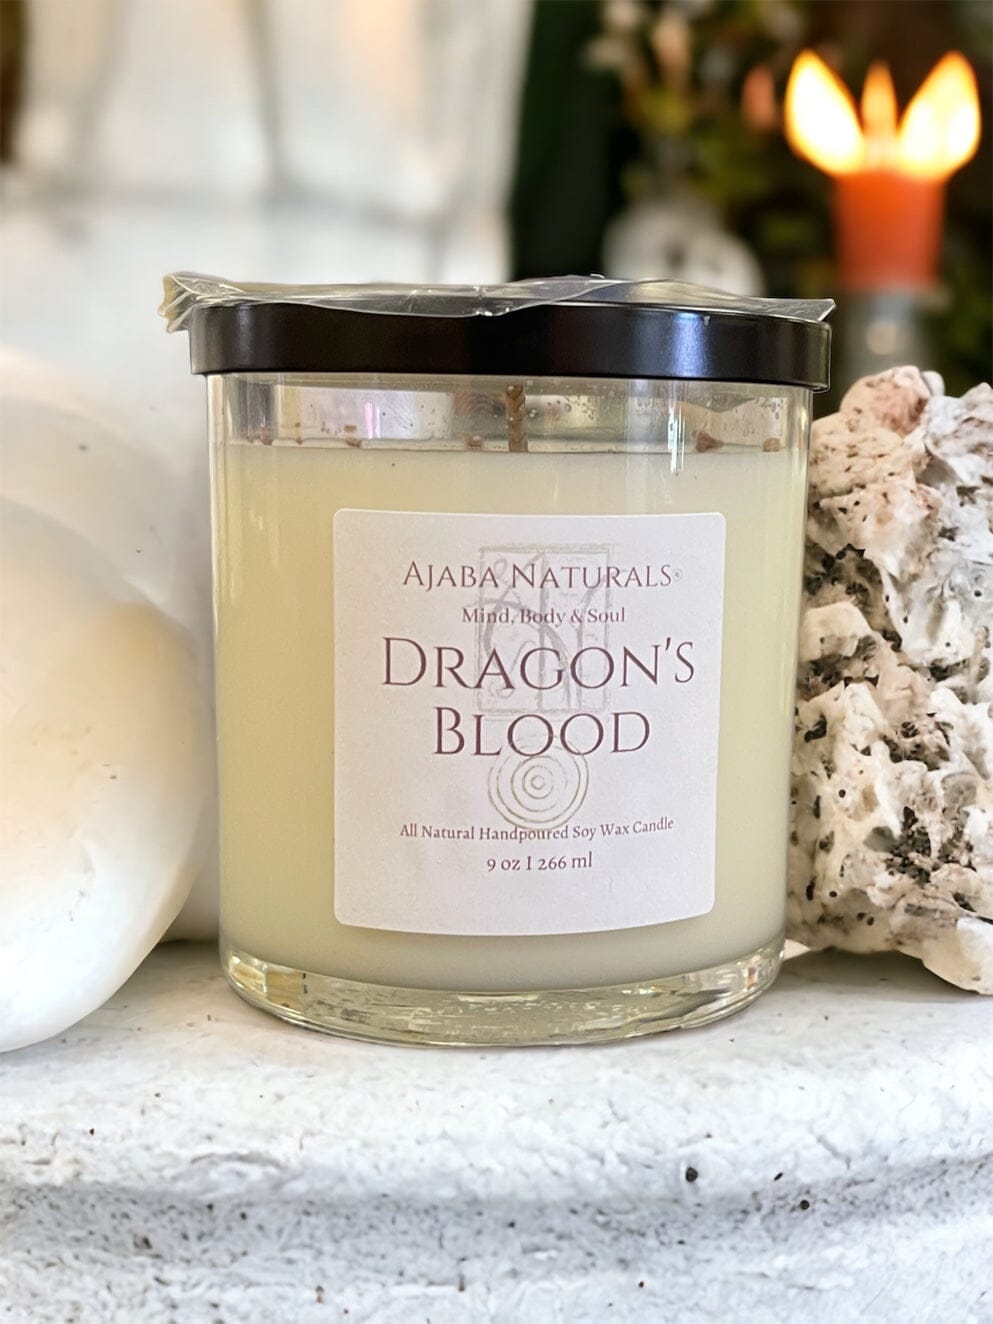 Dragon's Blood Handcrafted Soy Wax Candle Candle AJABA NATURALS® 